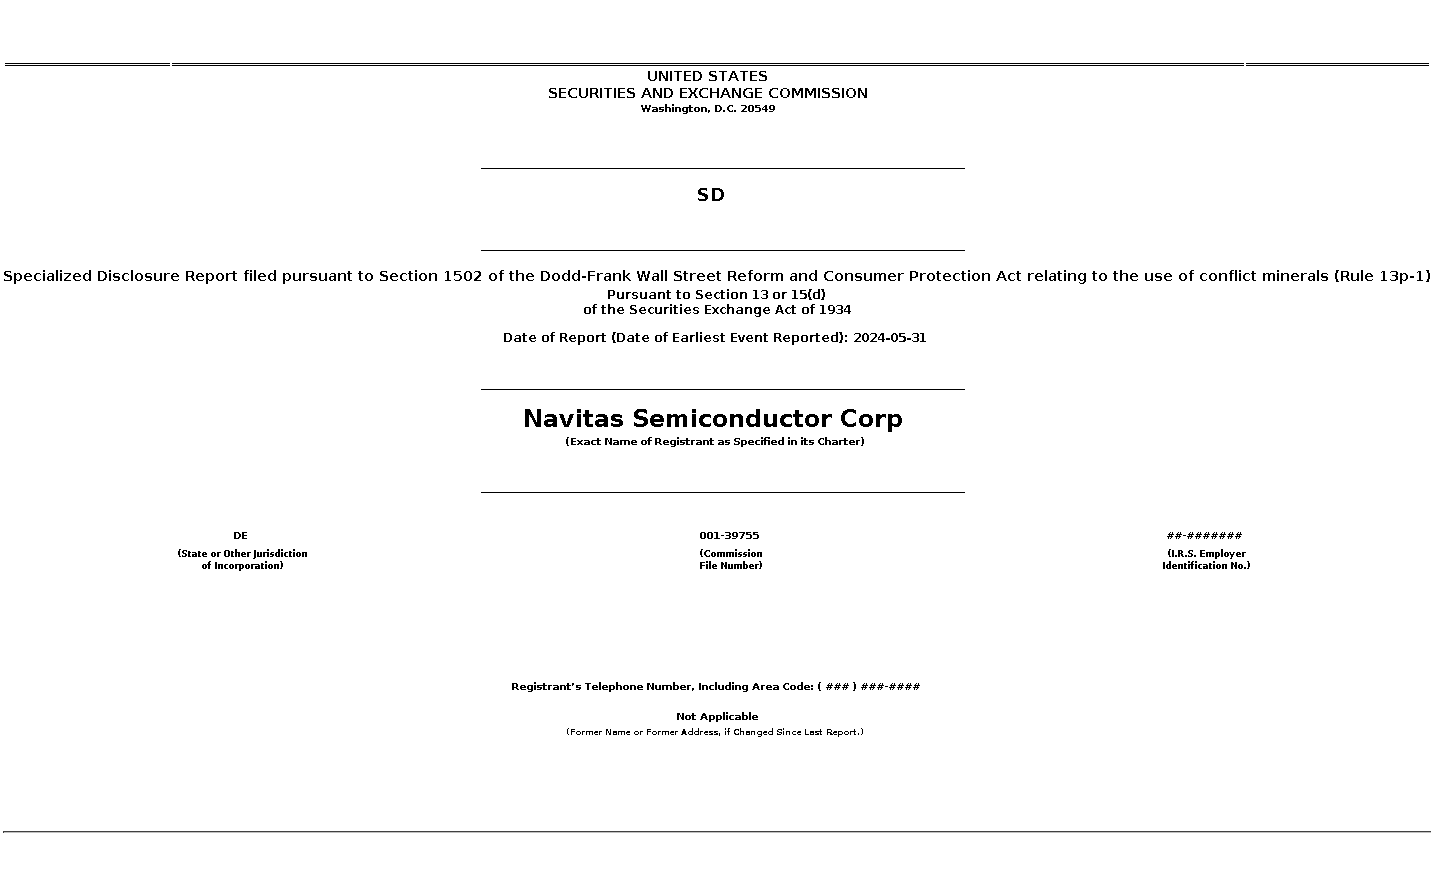 NVTS : SD Specialized Disclosure Report filed pursuant to Section 1502 of the Dodd-Frank Wall Street Reform and Consumer Protection Act relating to the use of conflict minerals (Rule 13p-1)